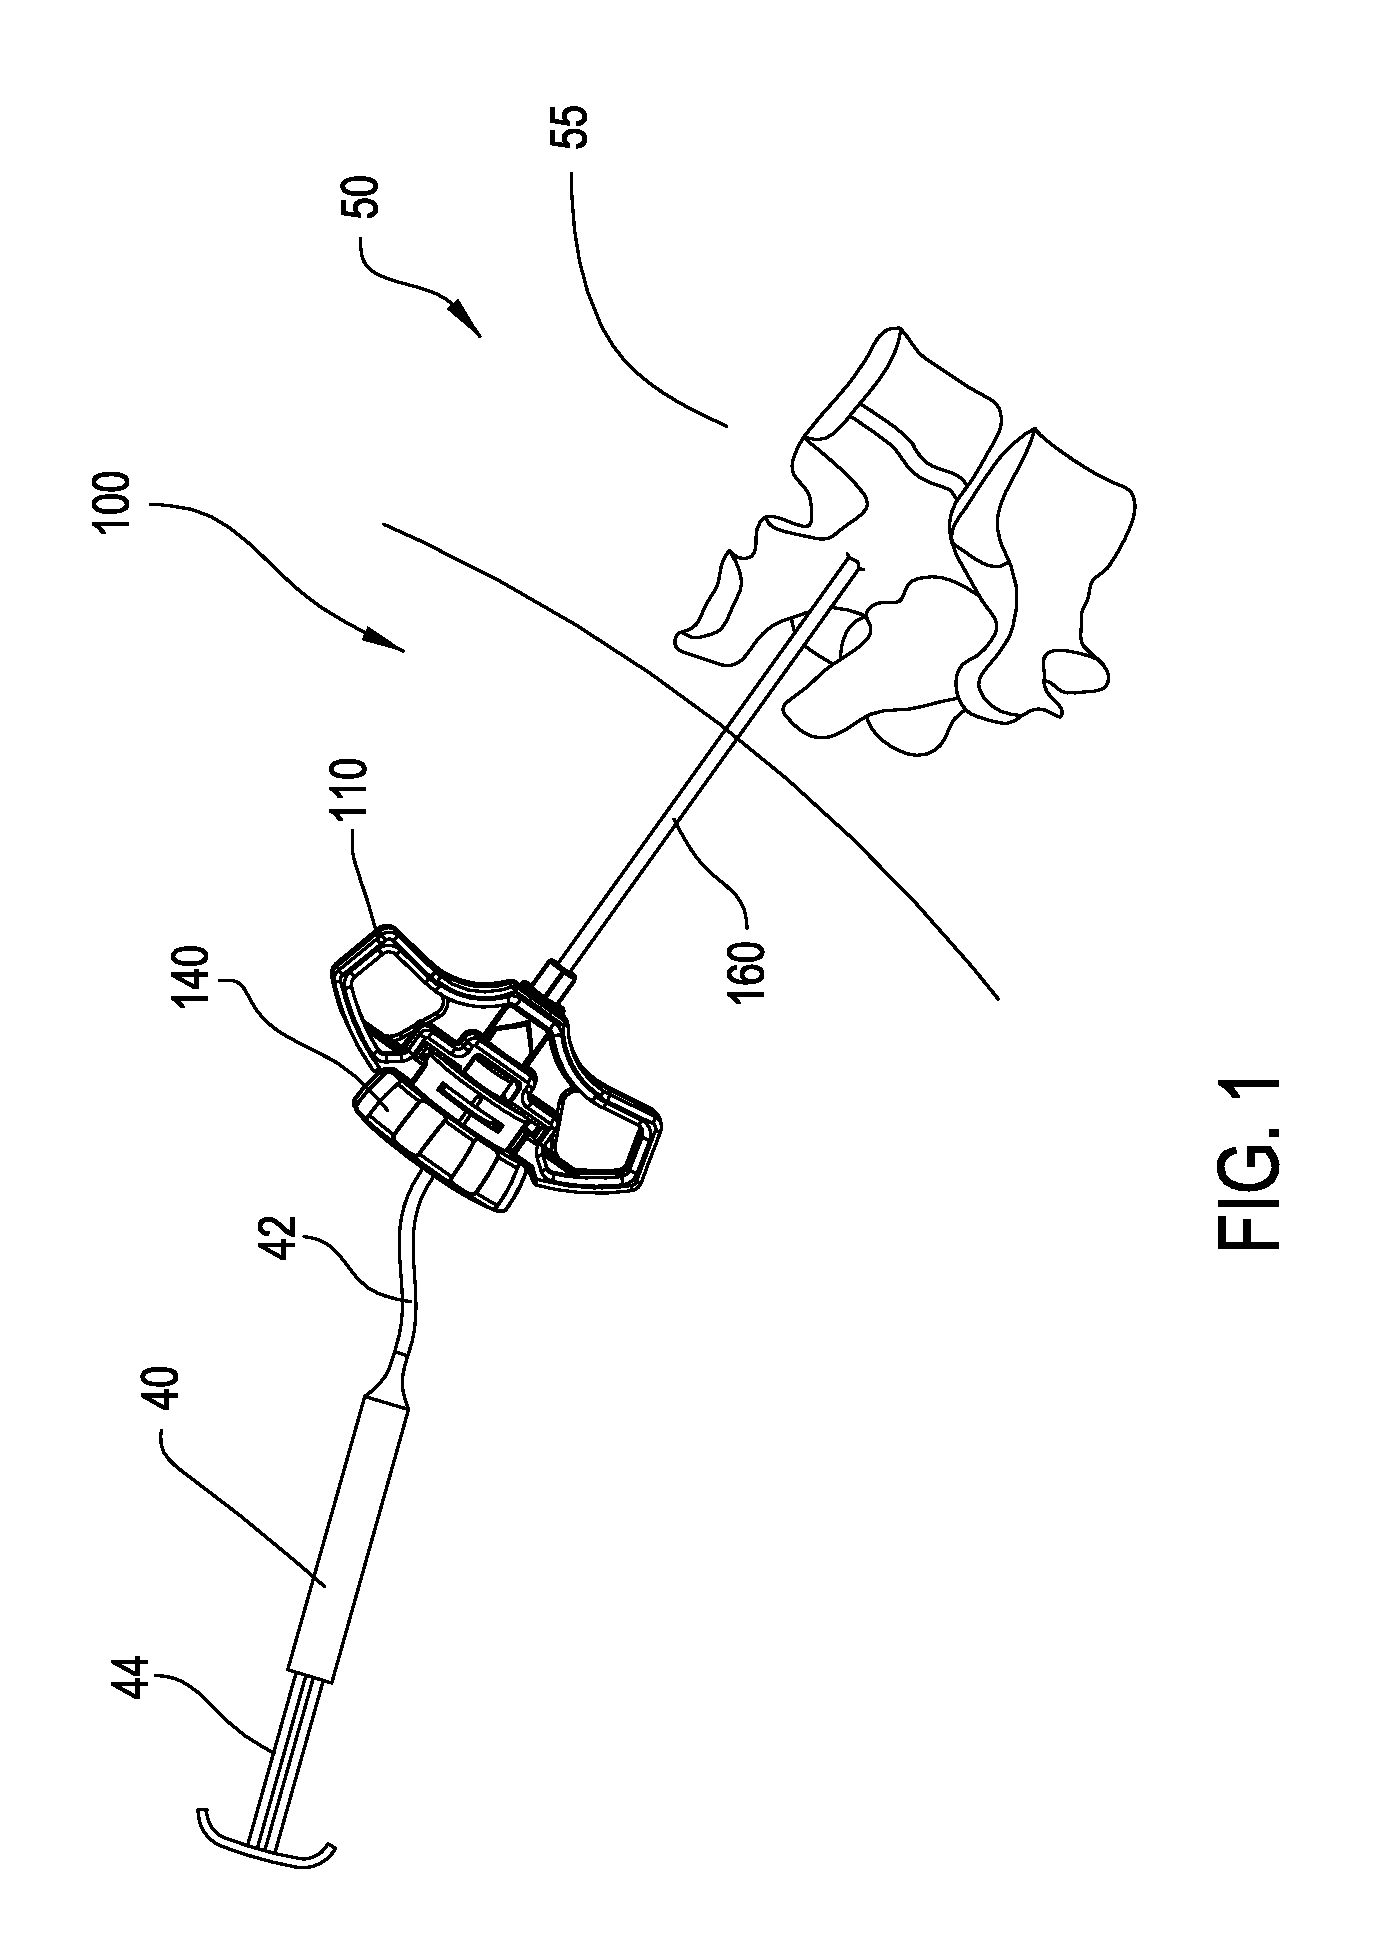 Cavity creator with integral cement delivery lumen